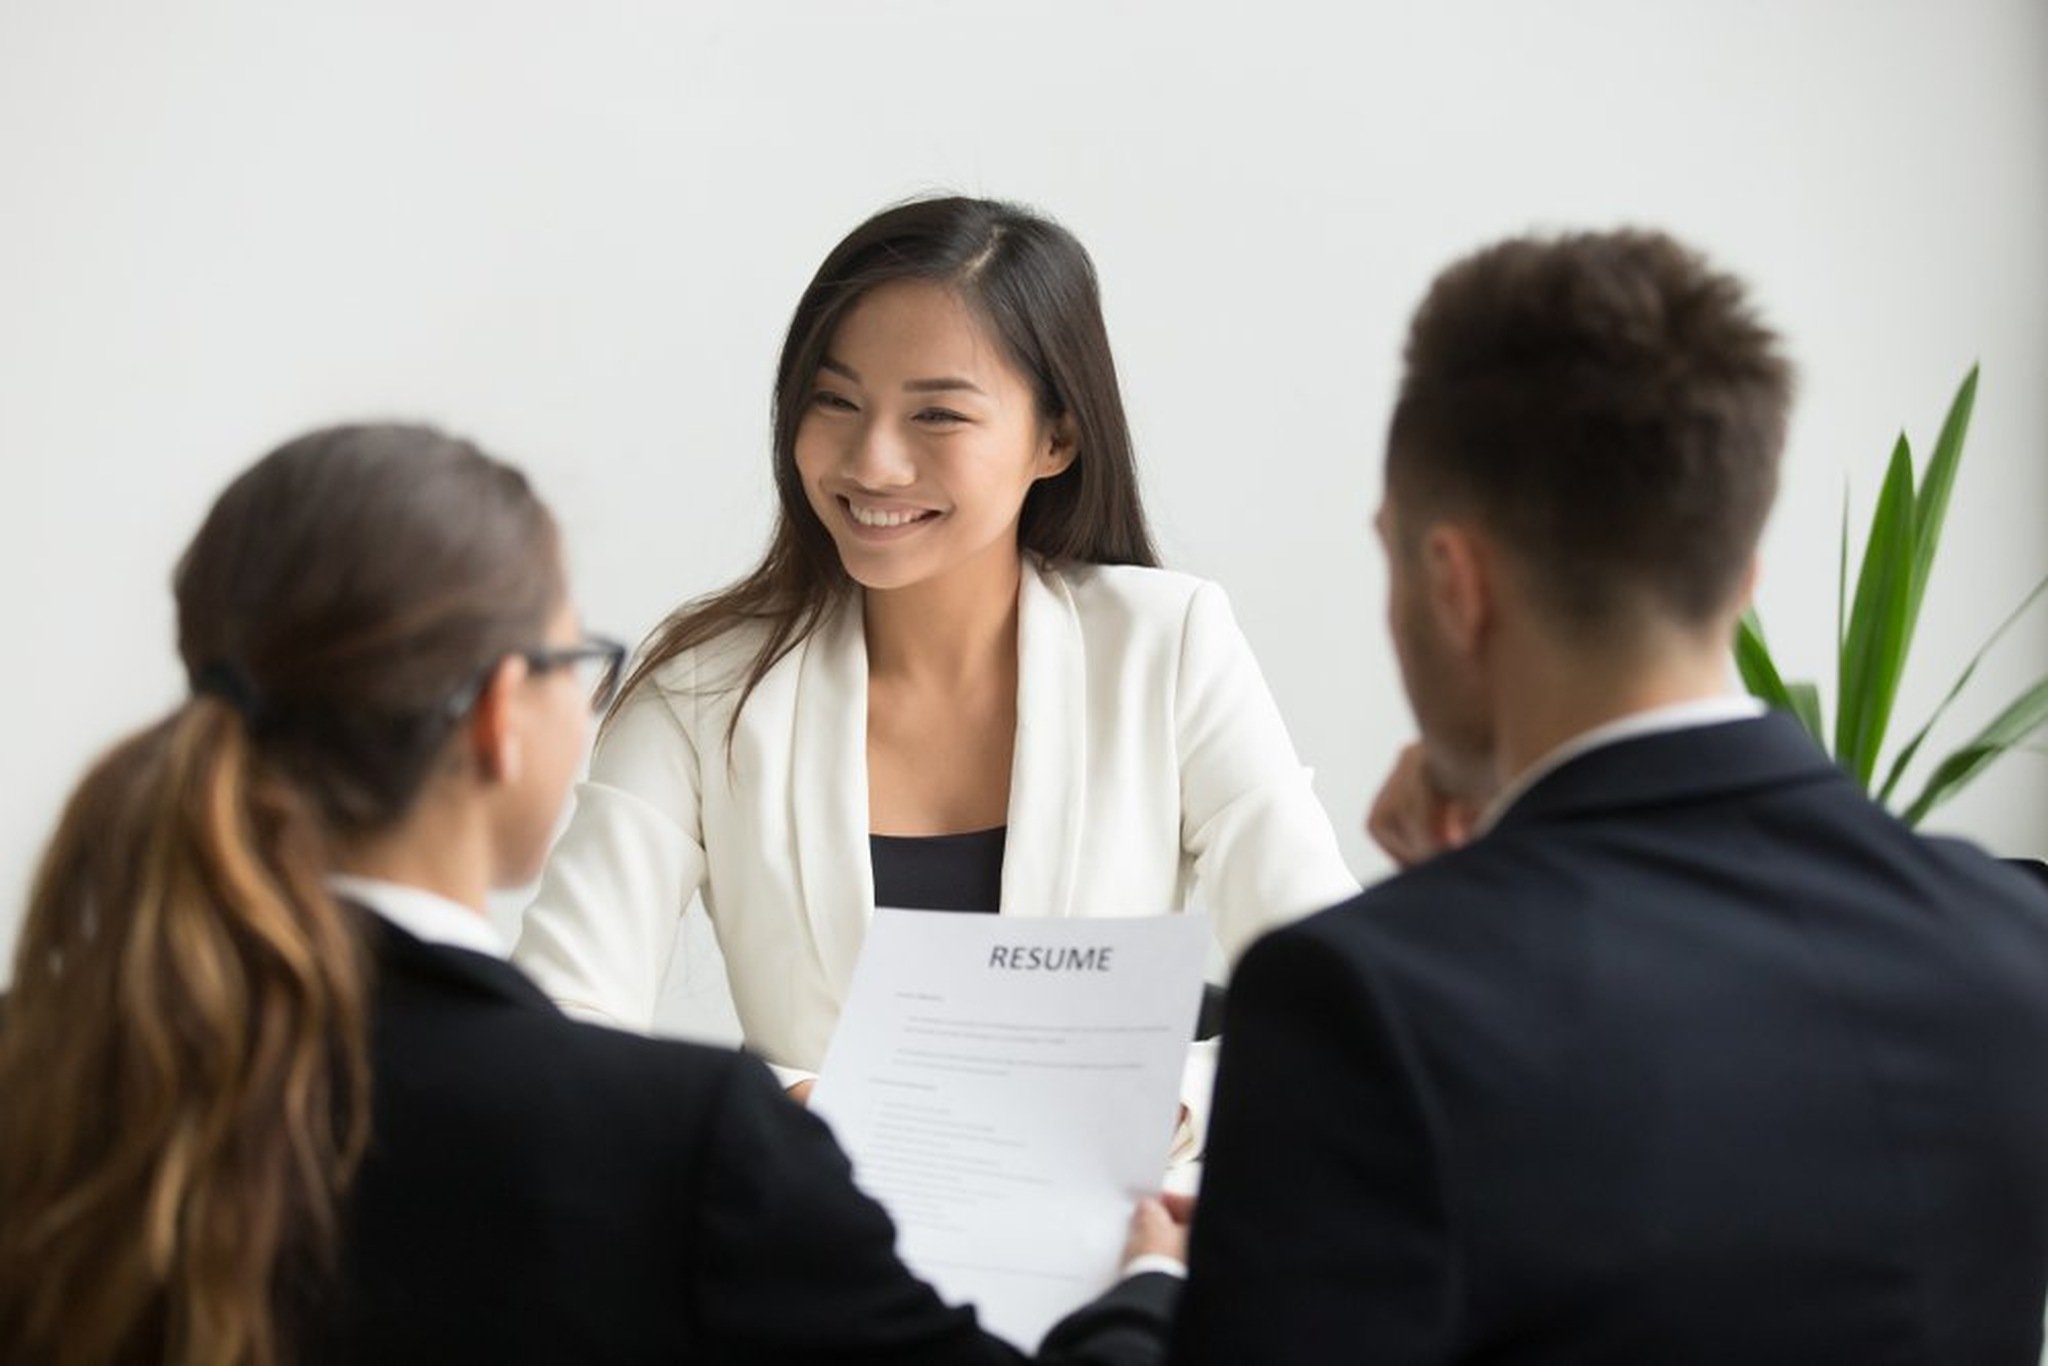 Two human resource people interviewing with a job candidate girl smiling